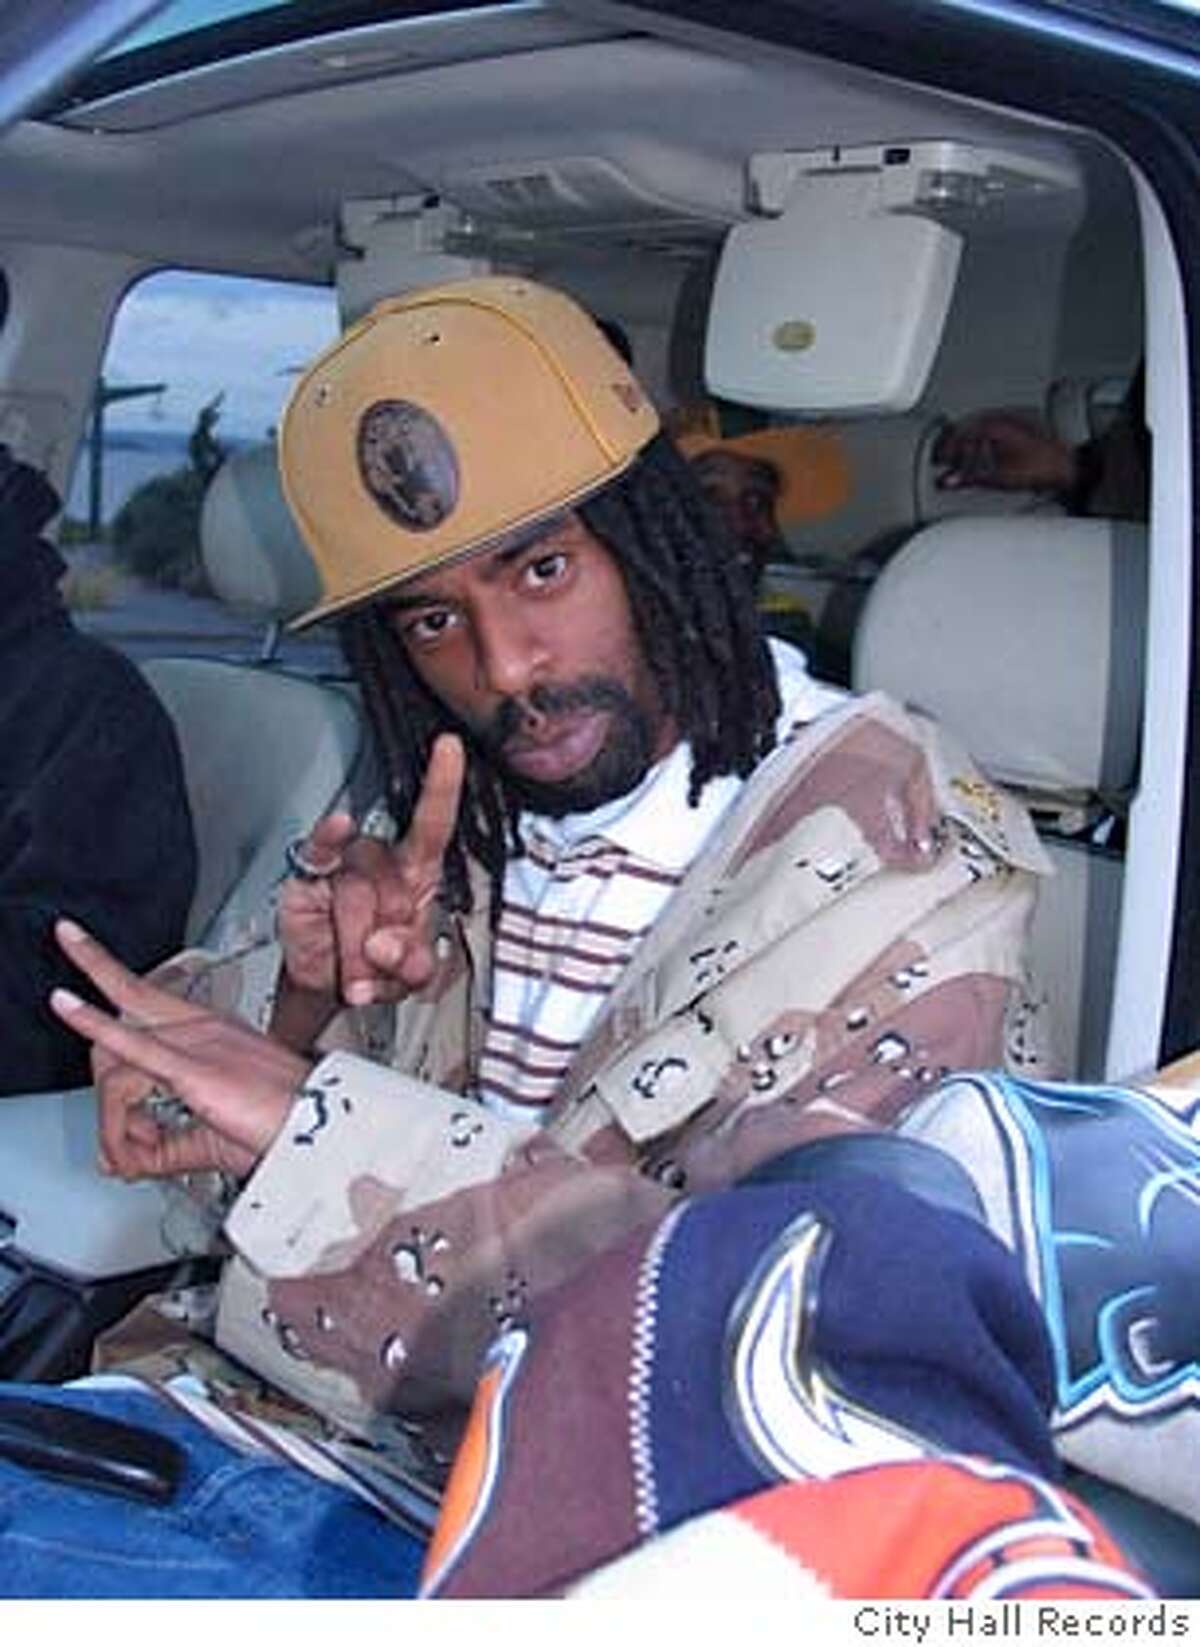 mac dre there is a song for you